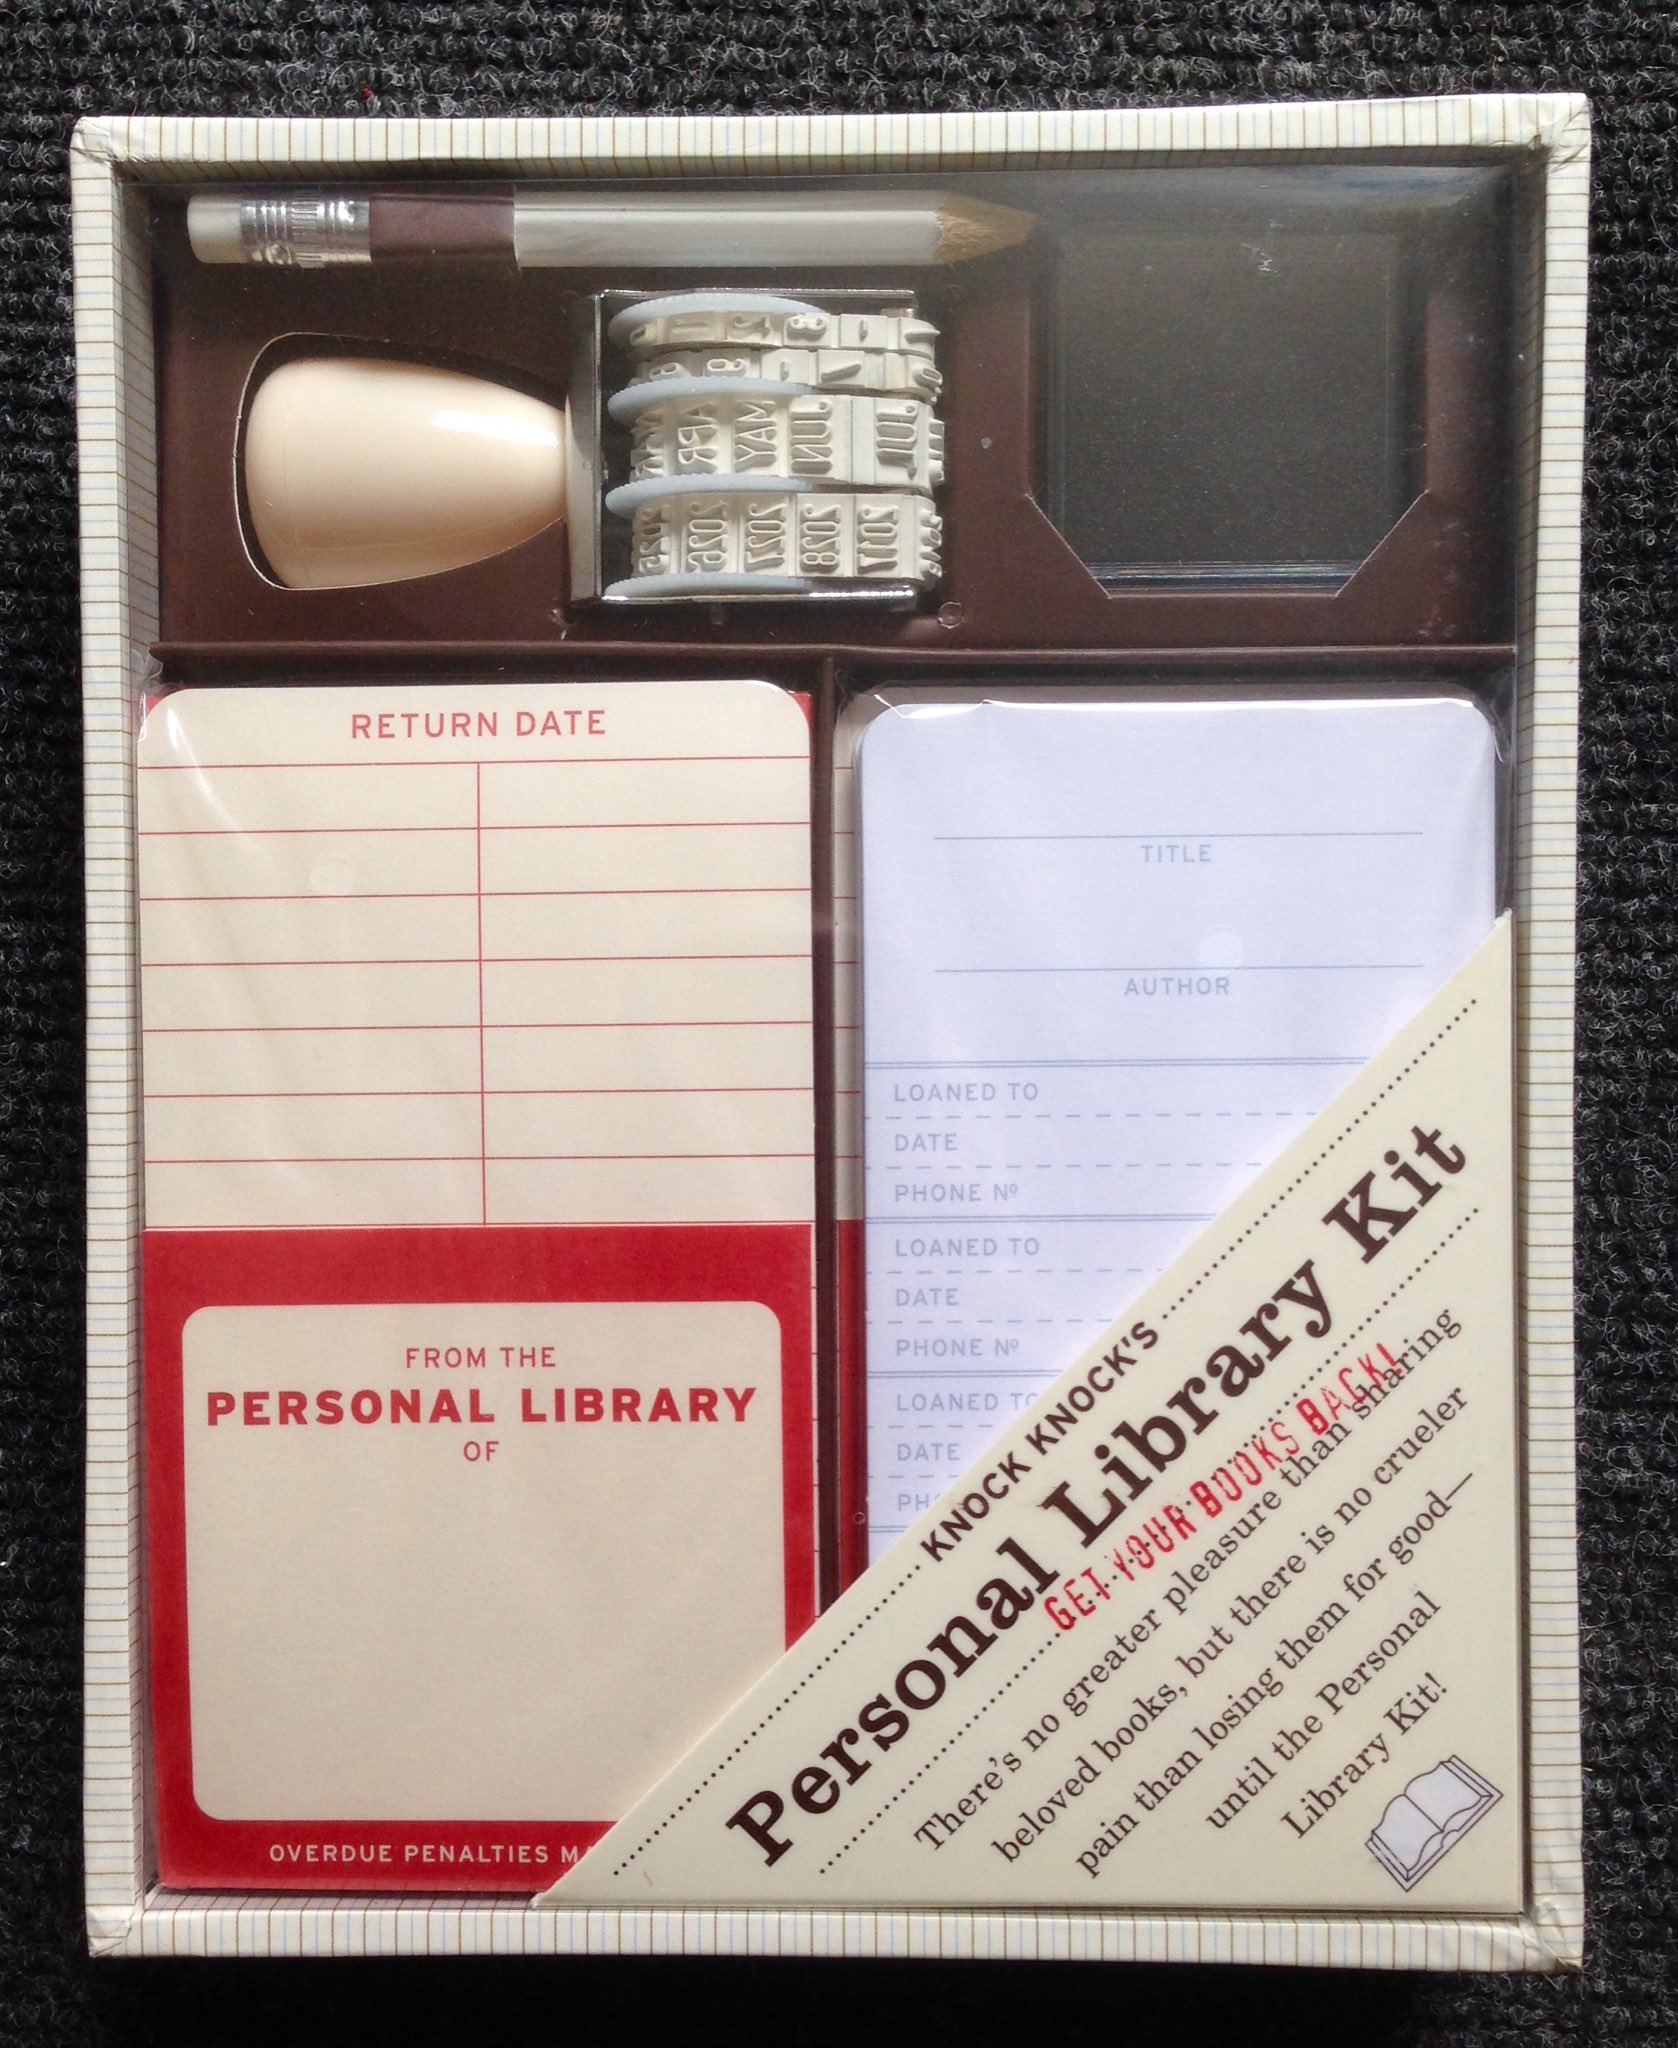 Knock Knock Personal Library Kit 